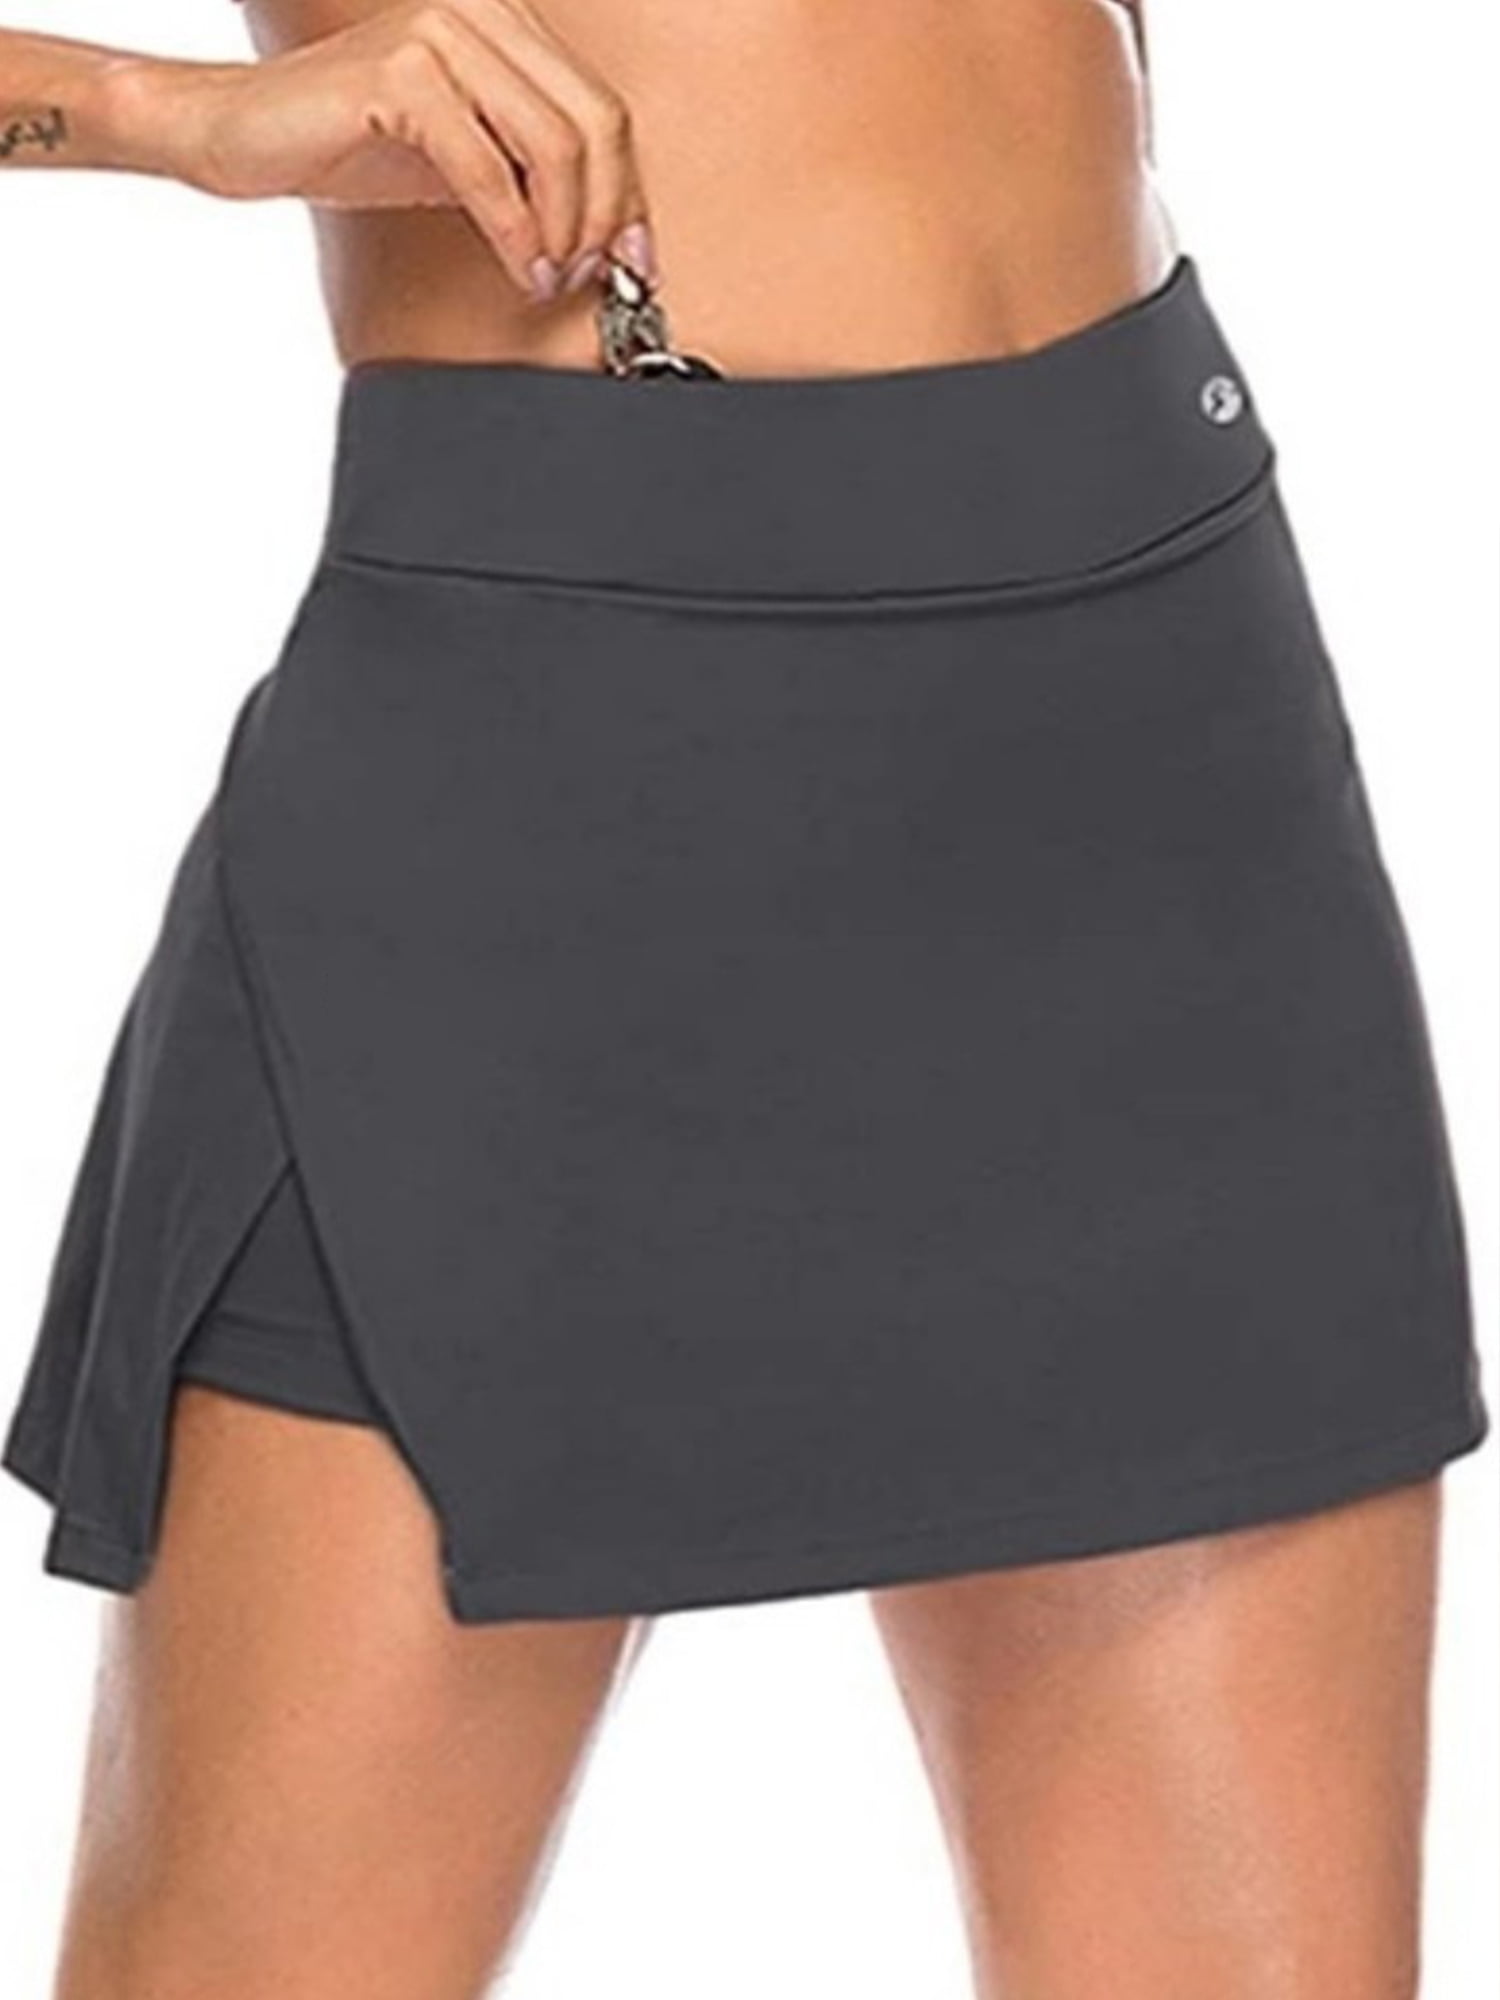 AMTF 2021 Womens 2 in 1 Fake Two Piece Culottes Quick-Drying Running Skorts Tennis Skirt Ladies Built-in Shorts Skirt 